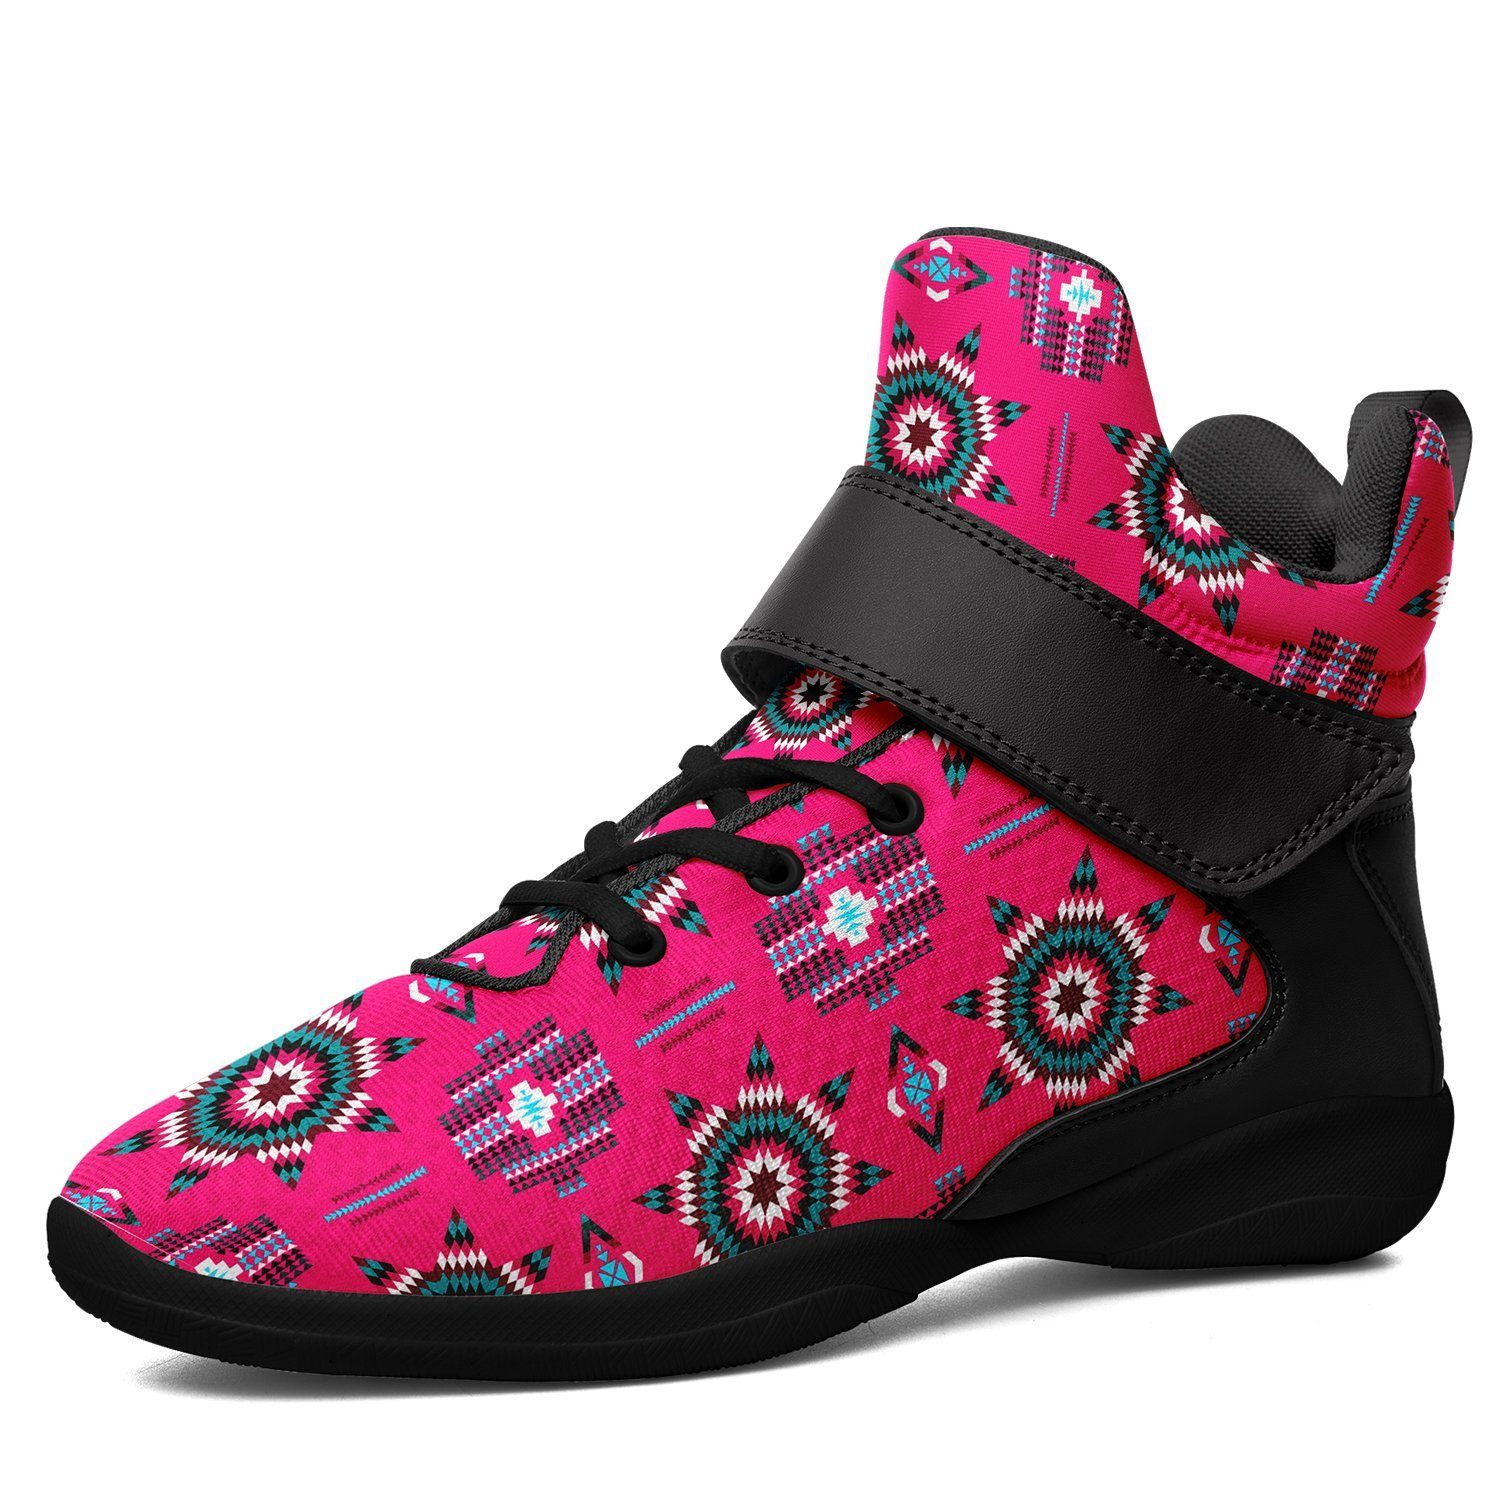 Rising Star Strawberry Moon Kid's Ipottaa Basketball / Sport High Top Shoes 49 Dzine US Child 12.5 / EUR 30 Black Sole with Black Strap 